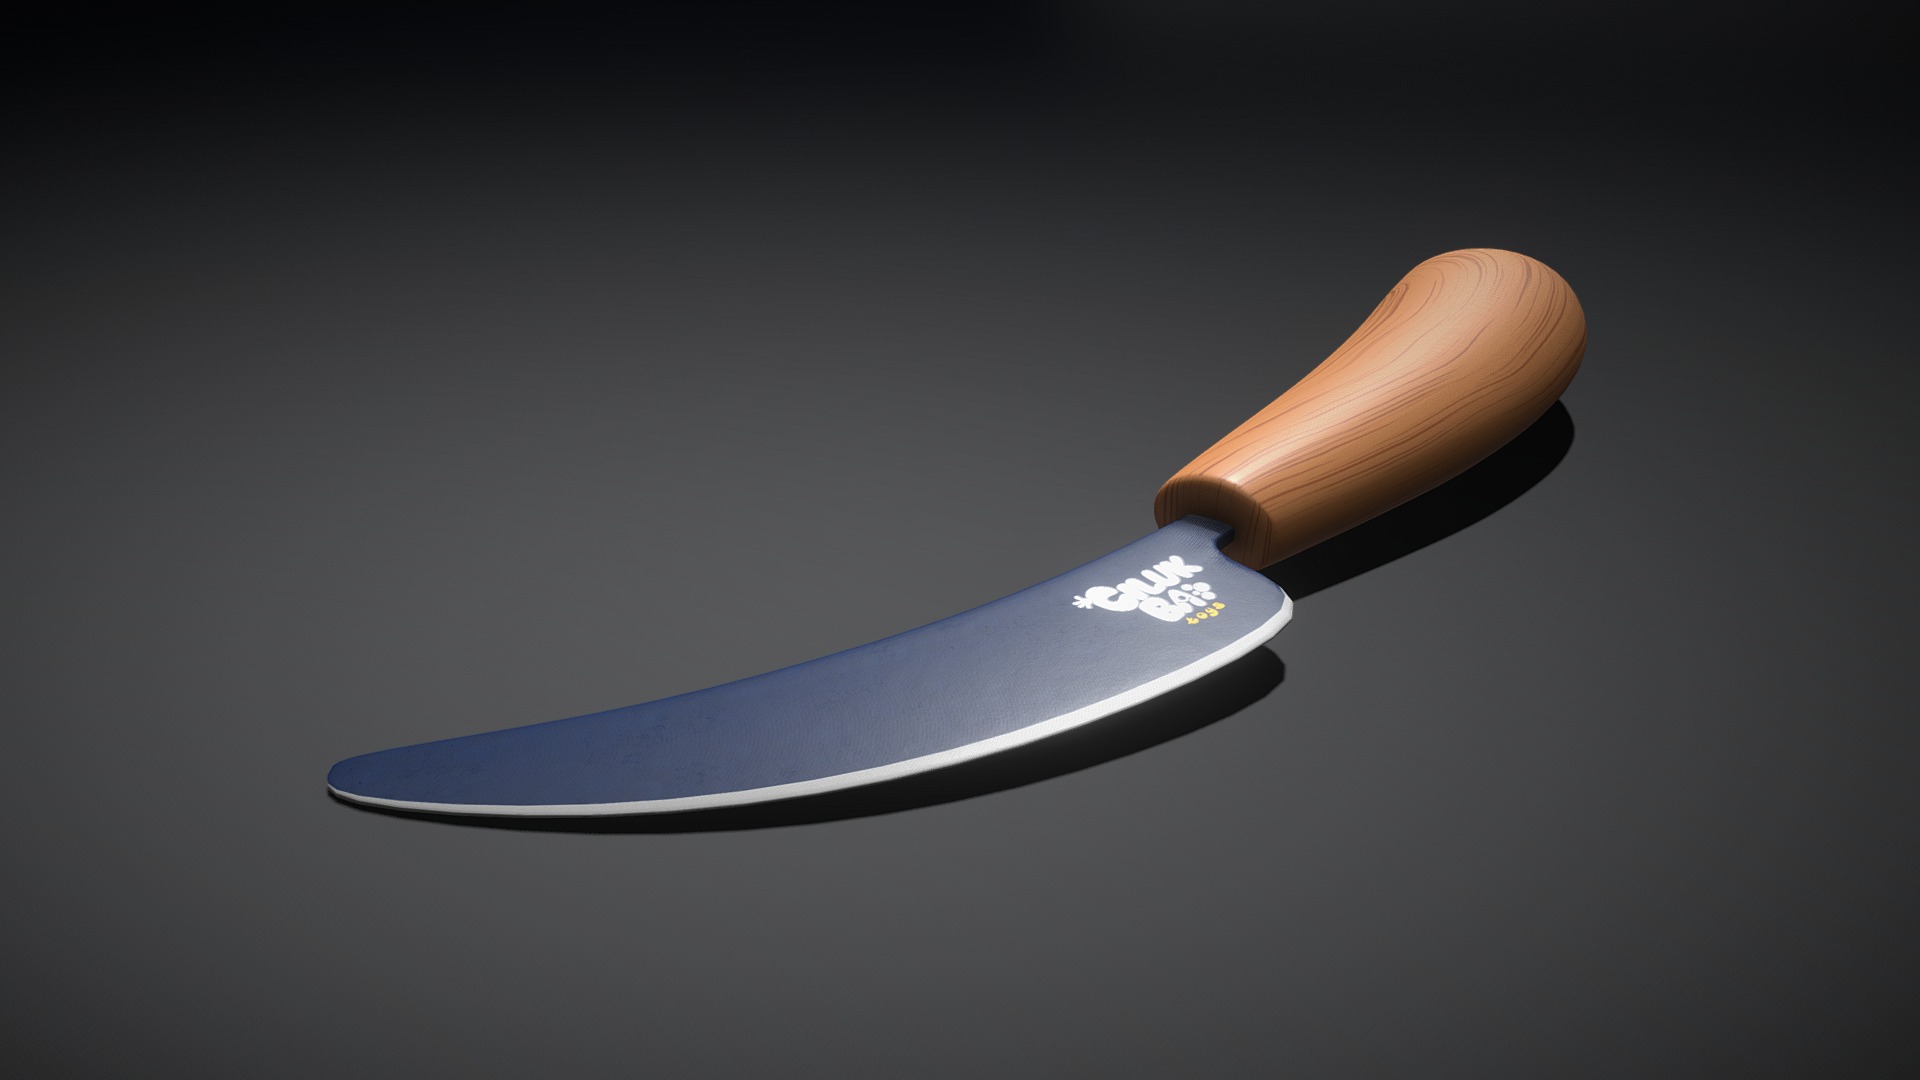 3D model blade toys - This is a 3D model of the blade toys. The 3D model is about a knife with a handle.